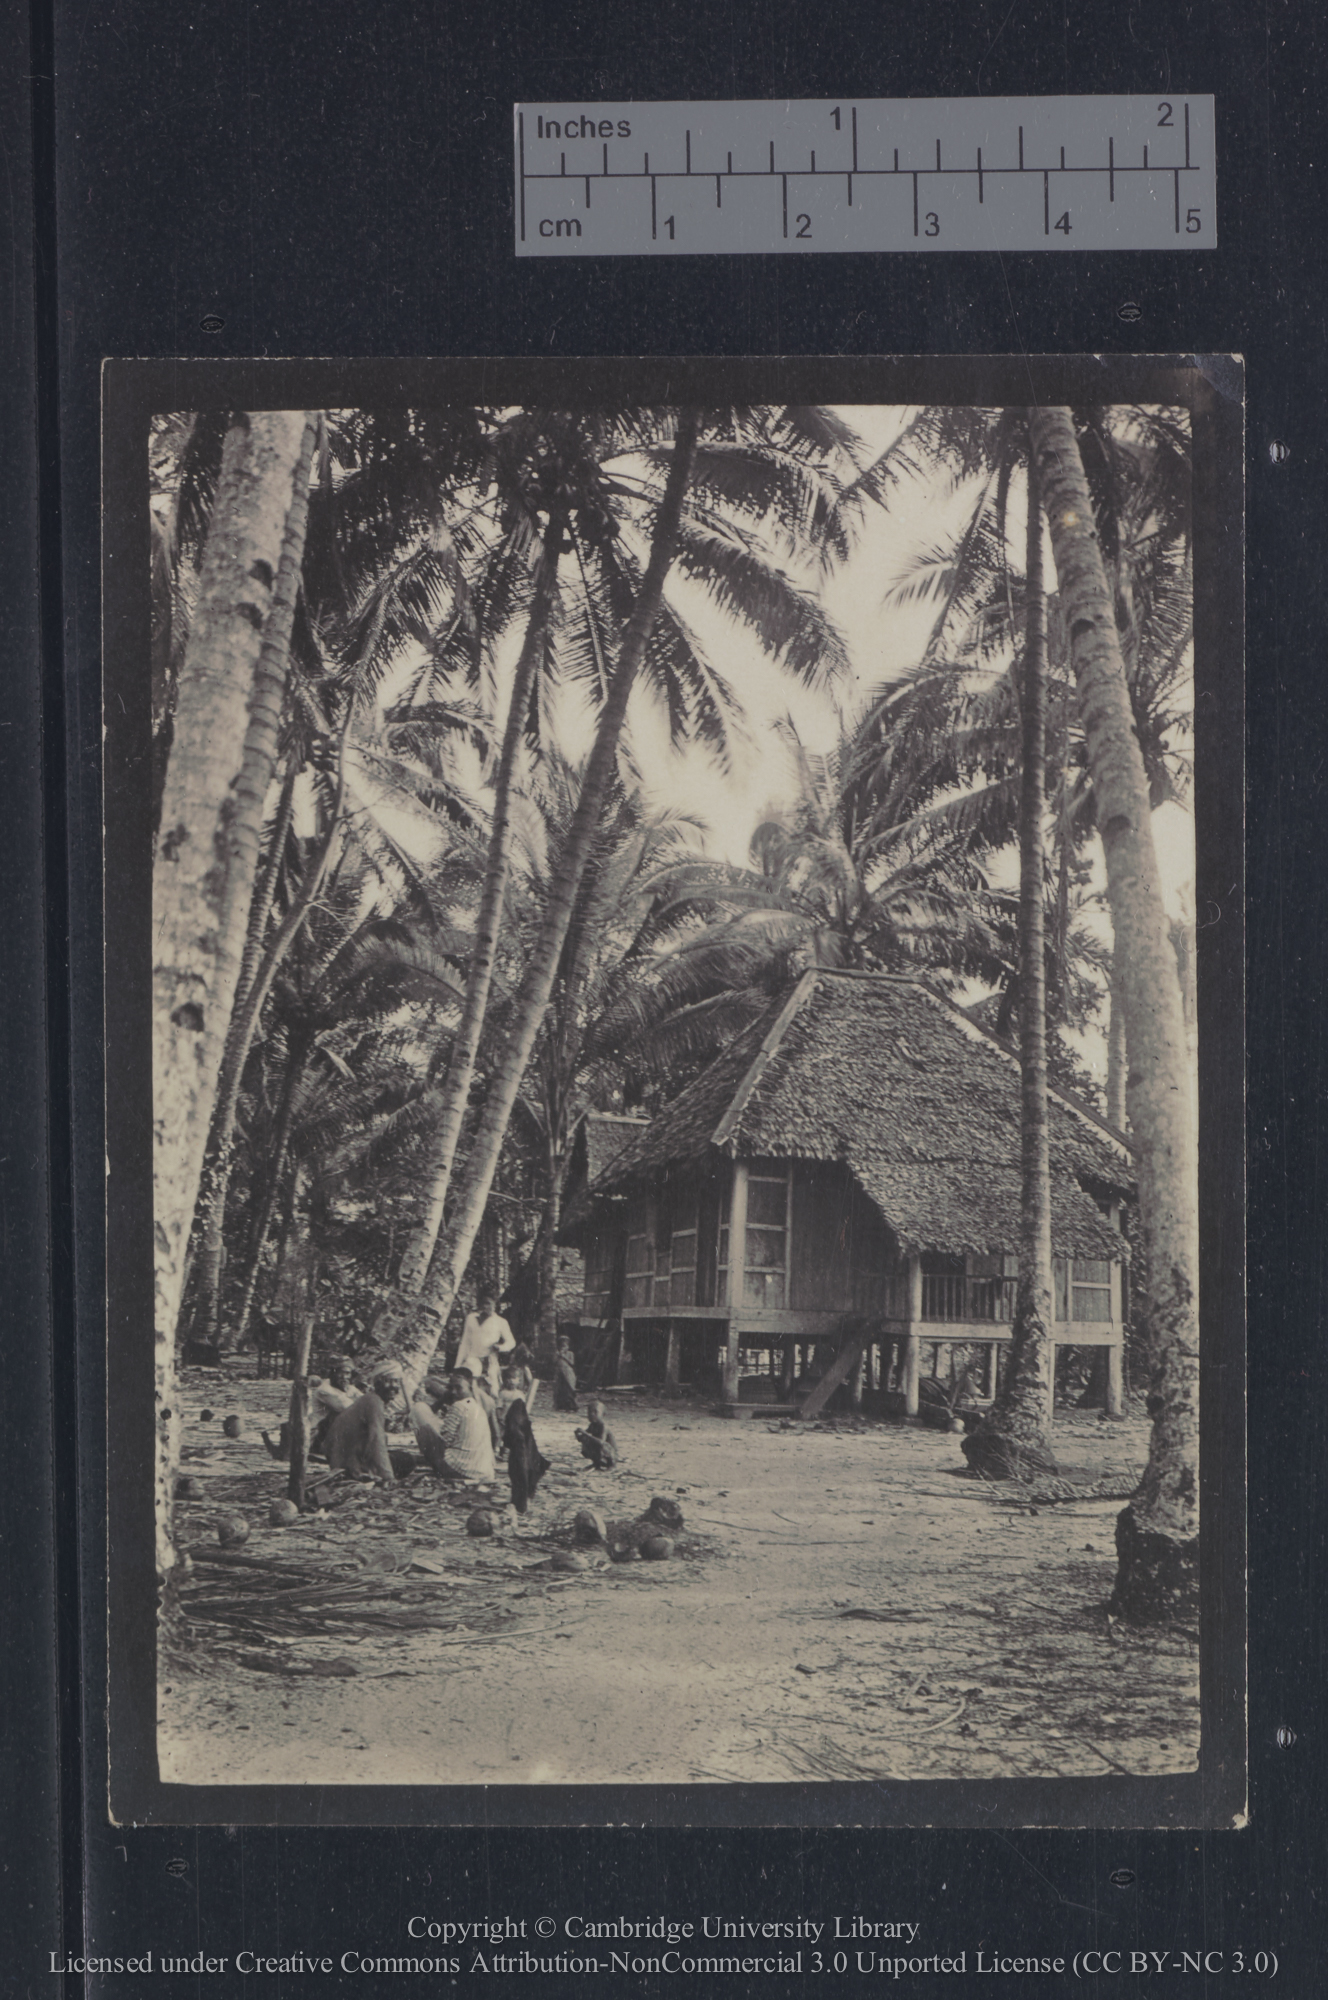 Malay house, Fairy Point, Changie, 1920 - 1929